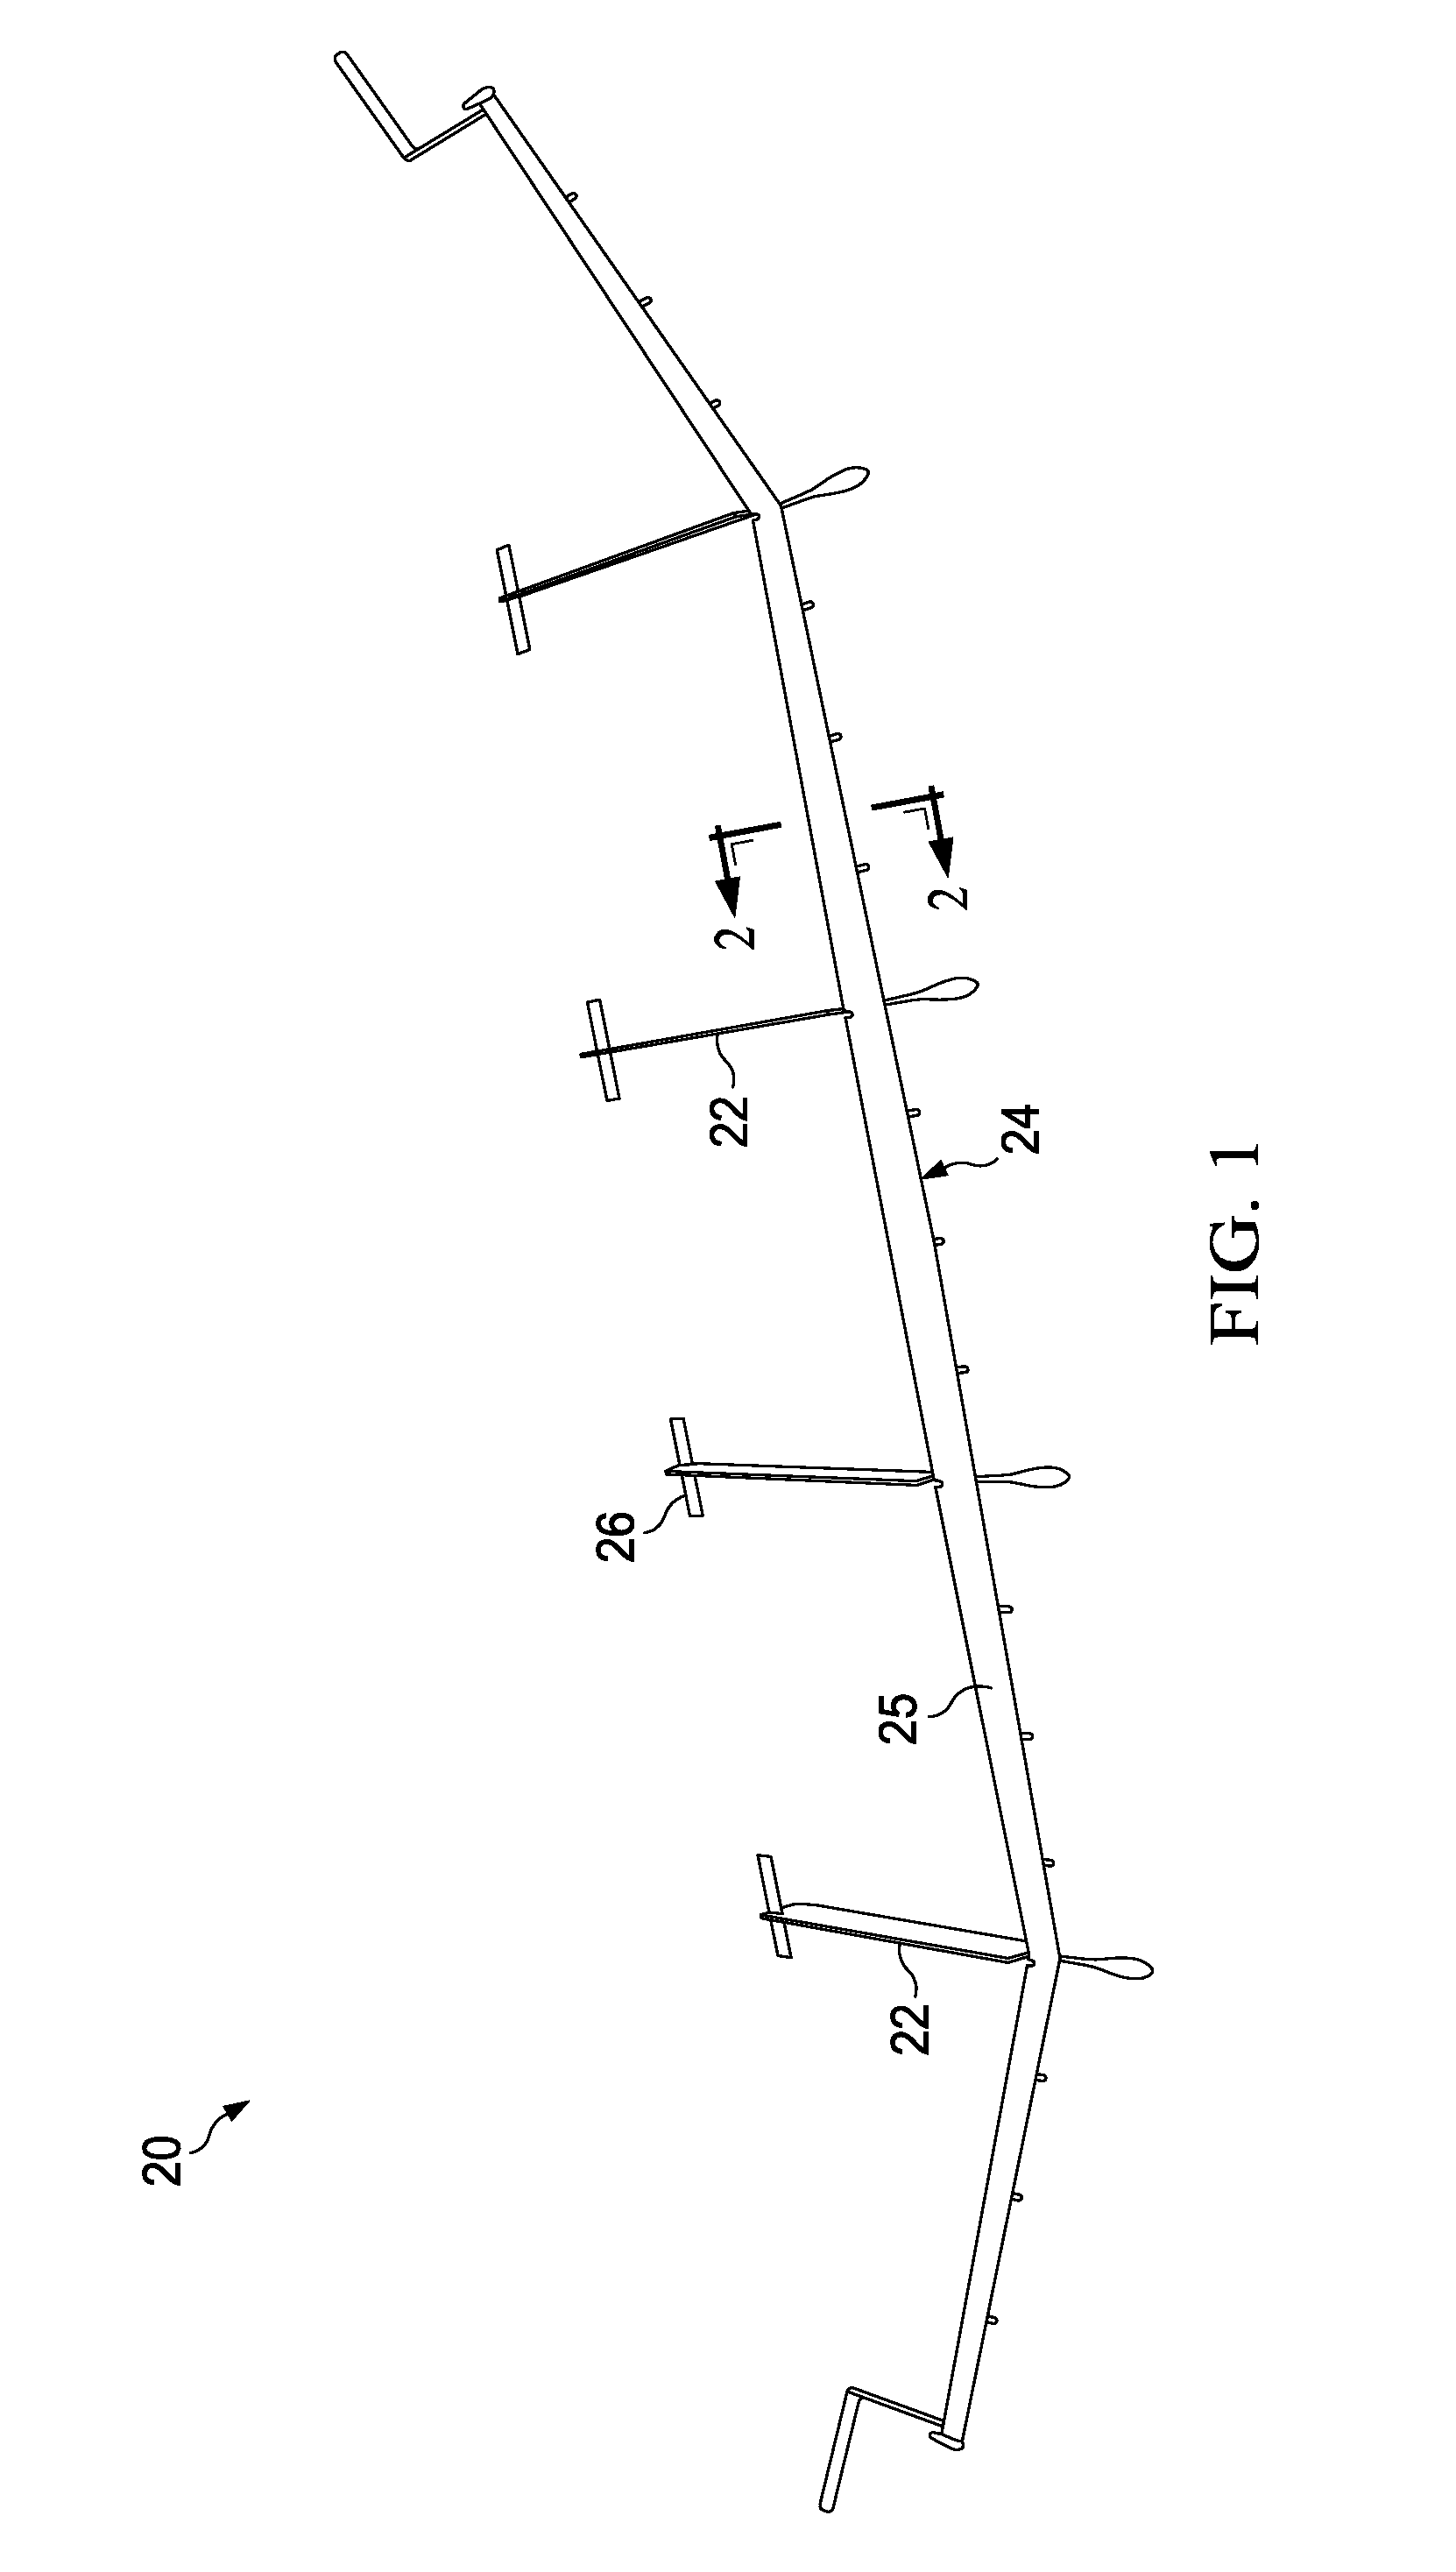 Attachment of Aircraft Ribs to Spars Having Variable Geometry